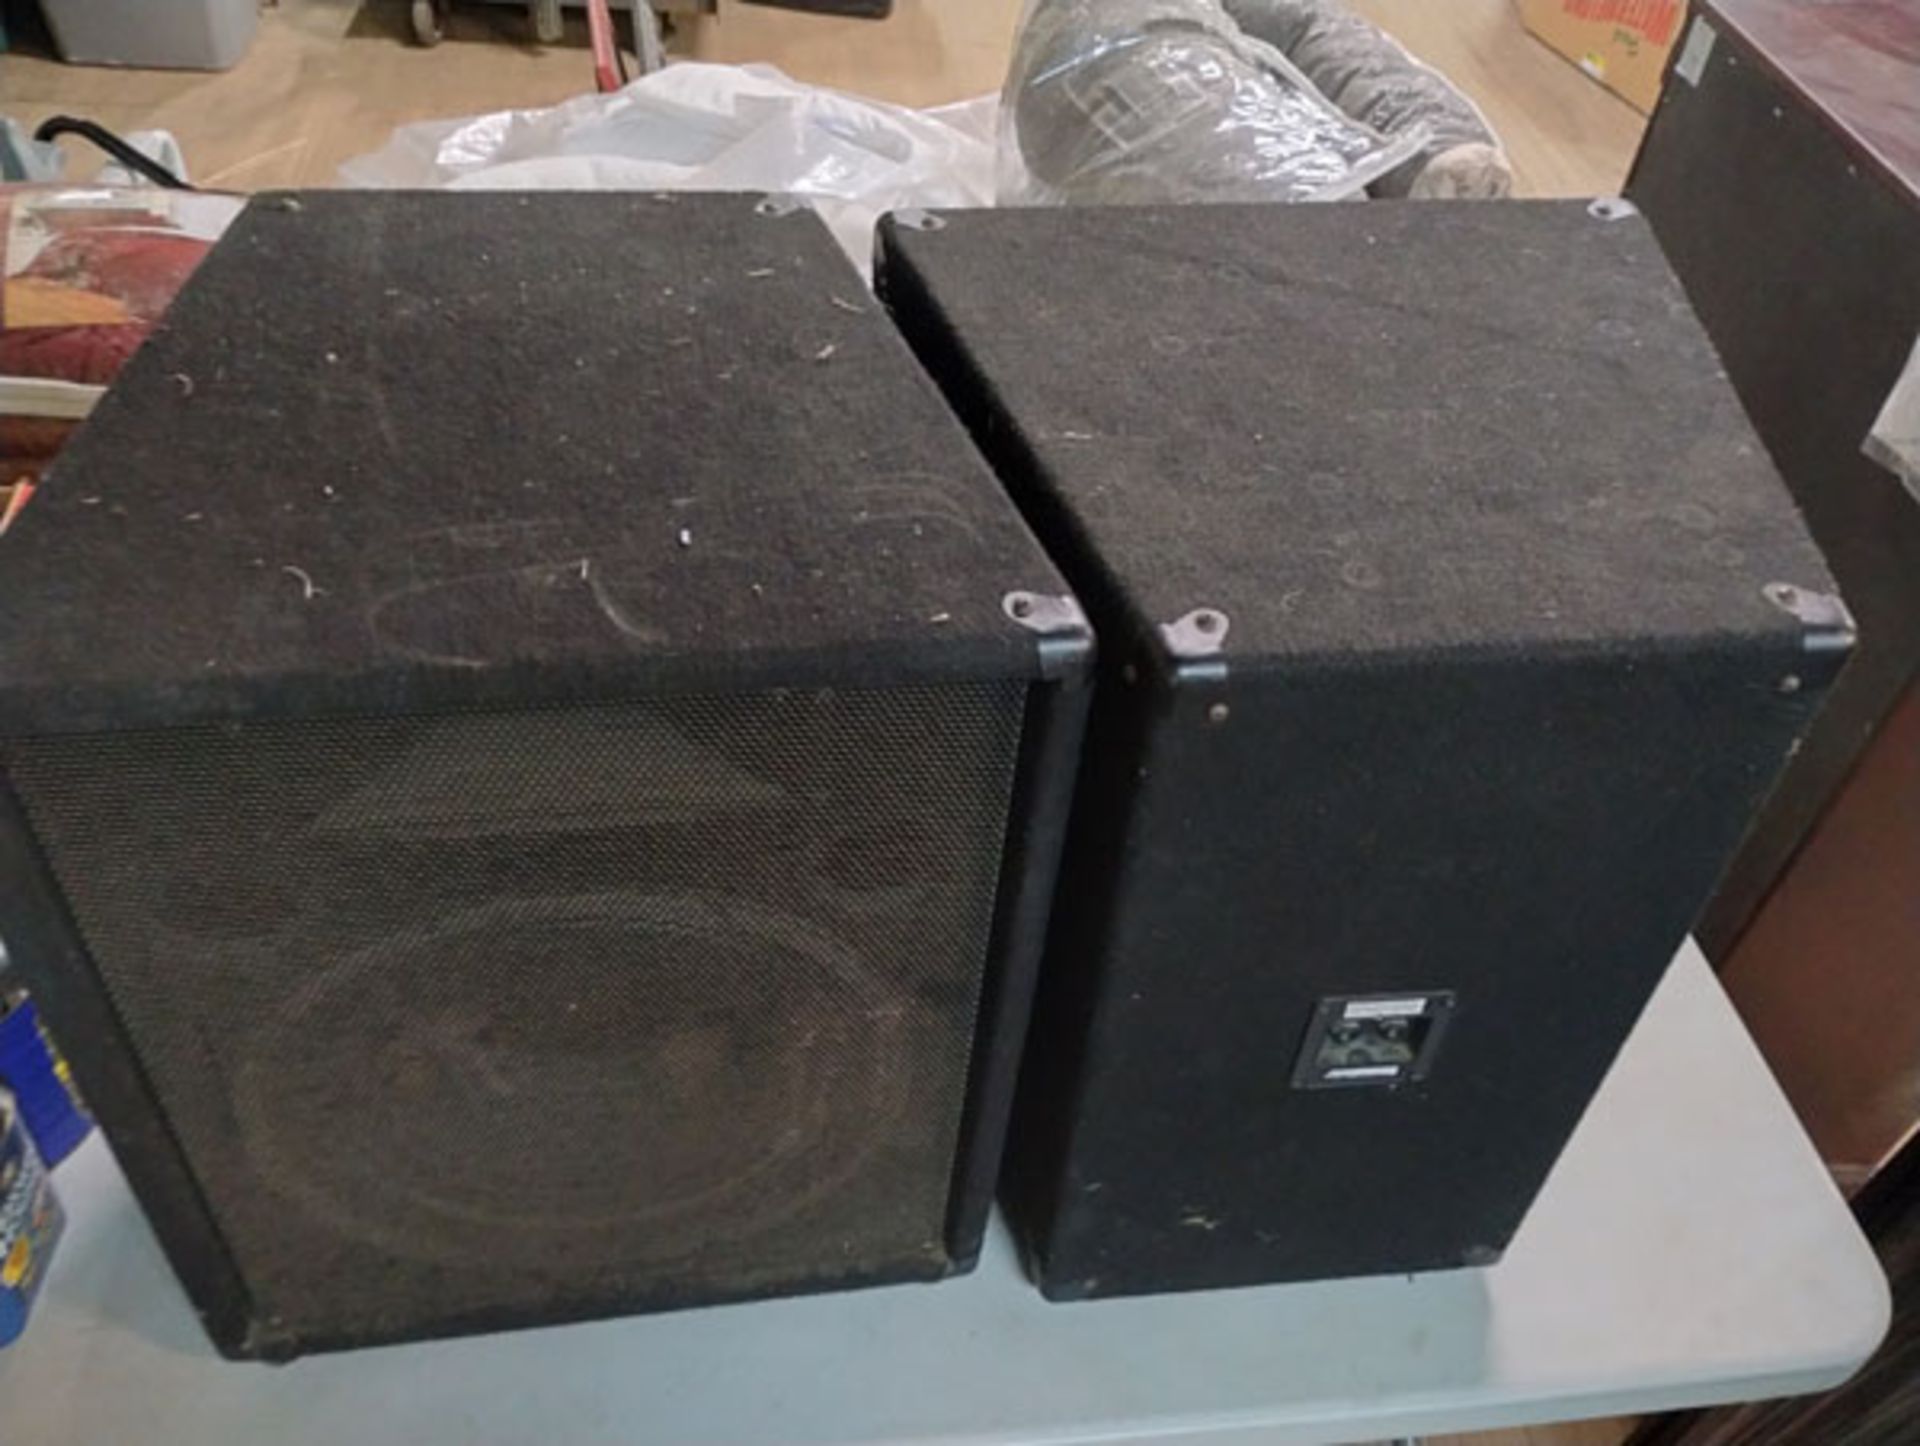 SET OF (2) 15" SPEAKERS - MODEL TRAP-115H-S1 , 250W (This lot of located at the Grossman warehouse - Image 3 of 8